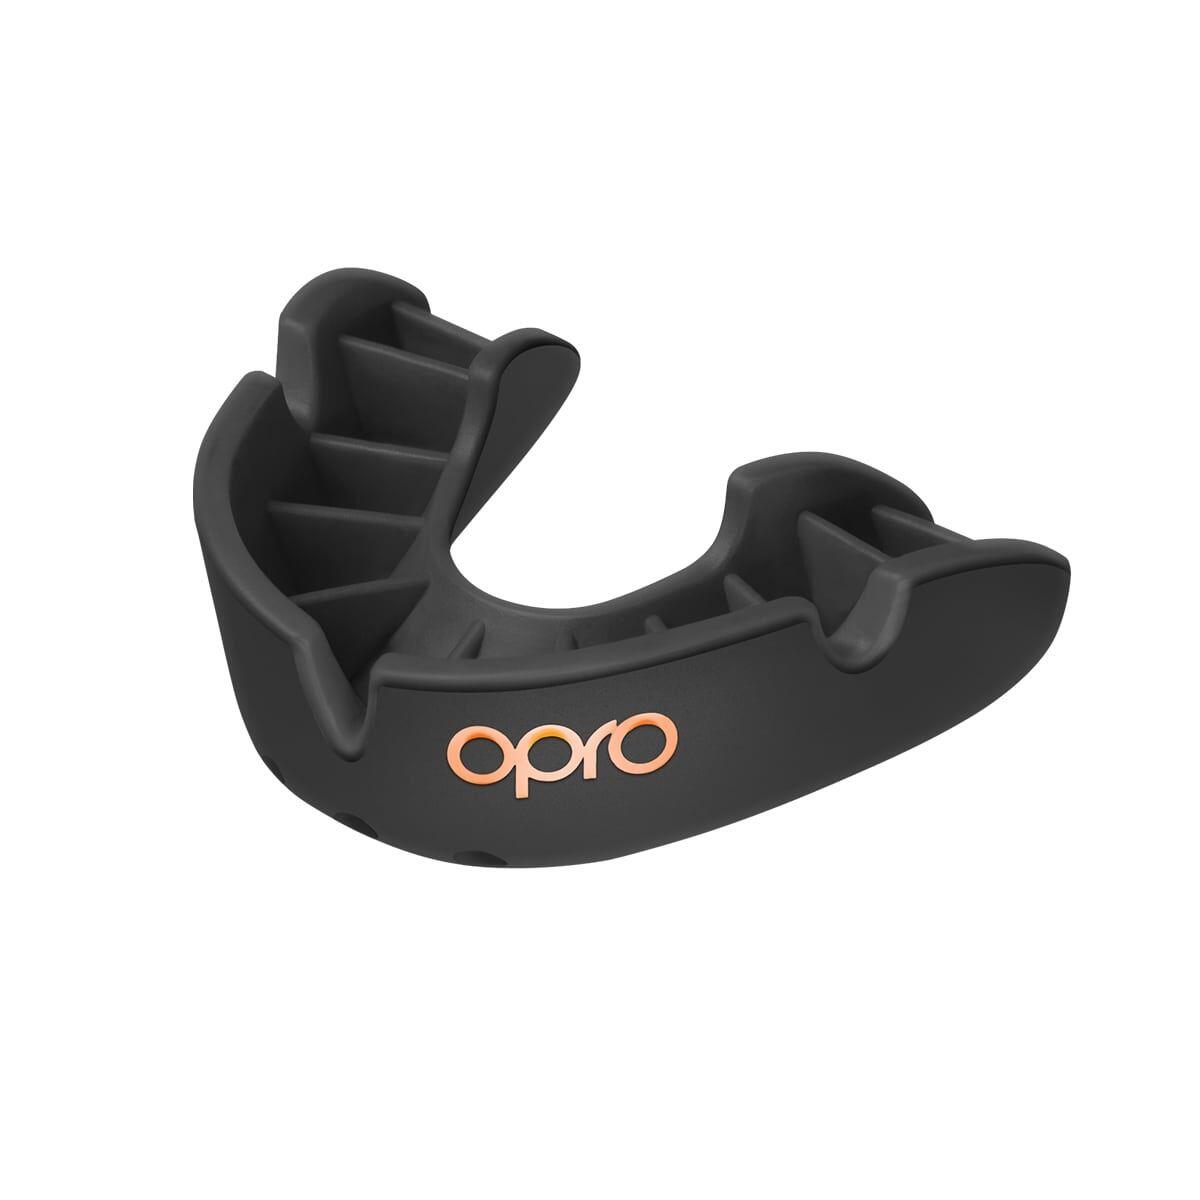 OPRO Black Opro Bronze Self-Fit Mouth Guard